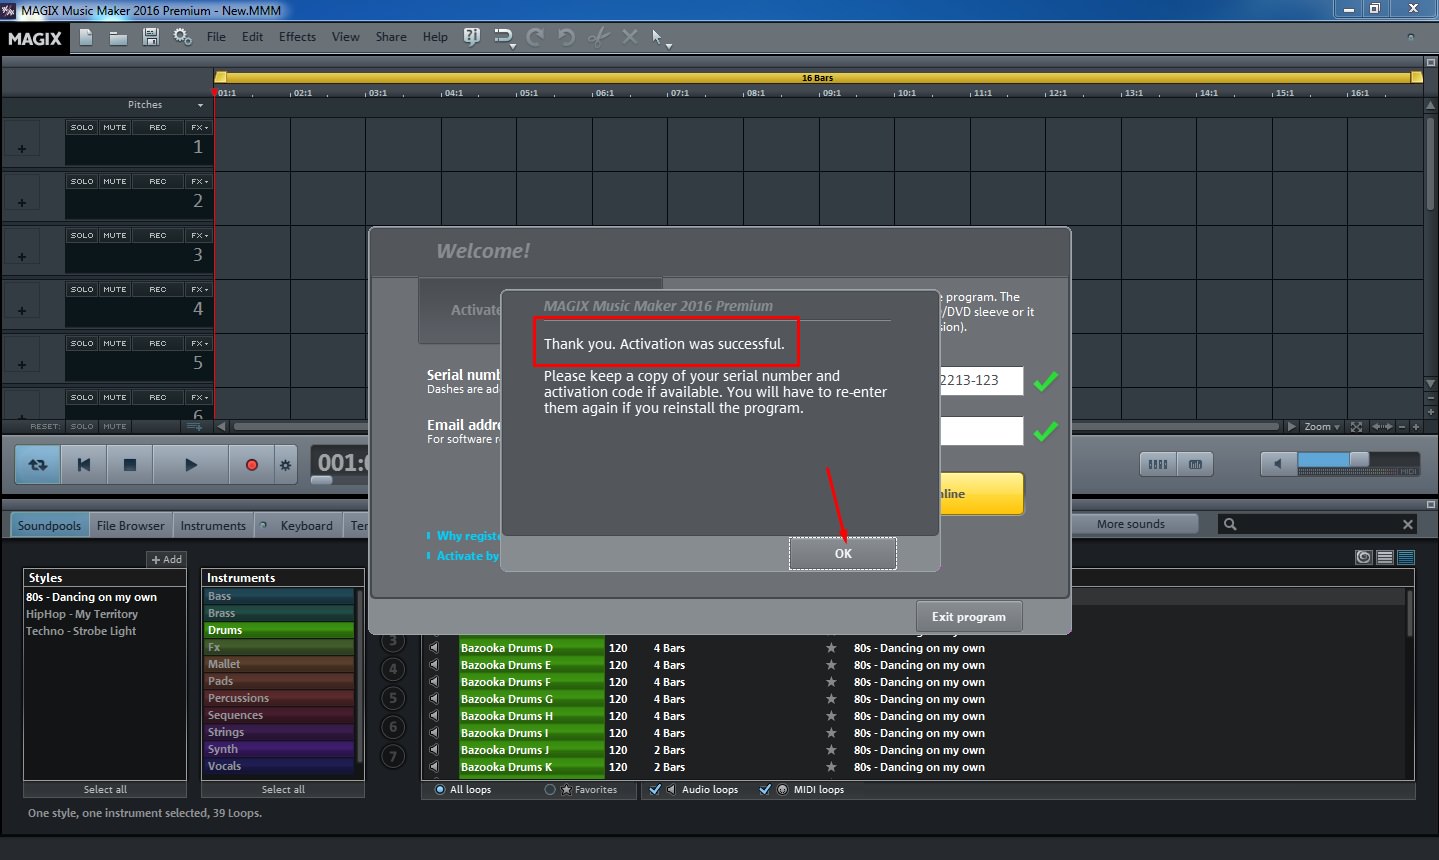 magix music maker 17 instrument package free download